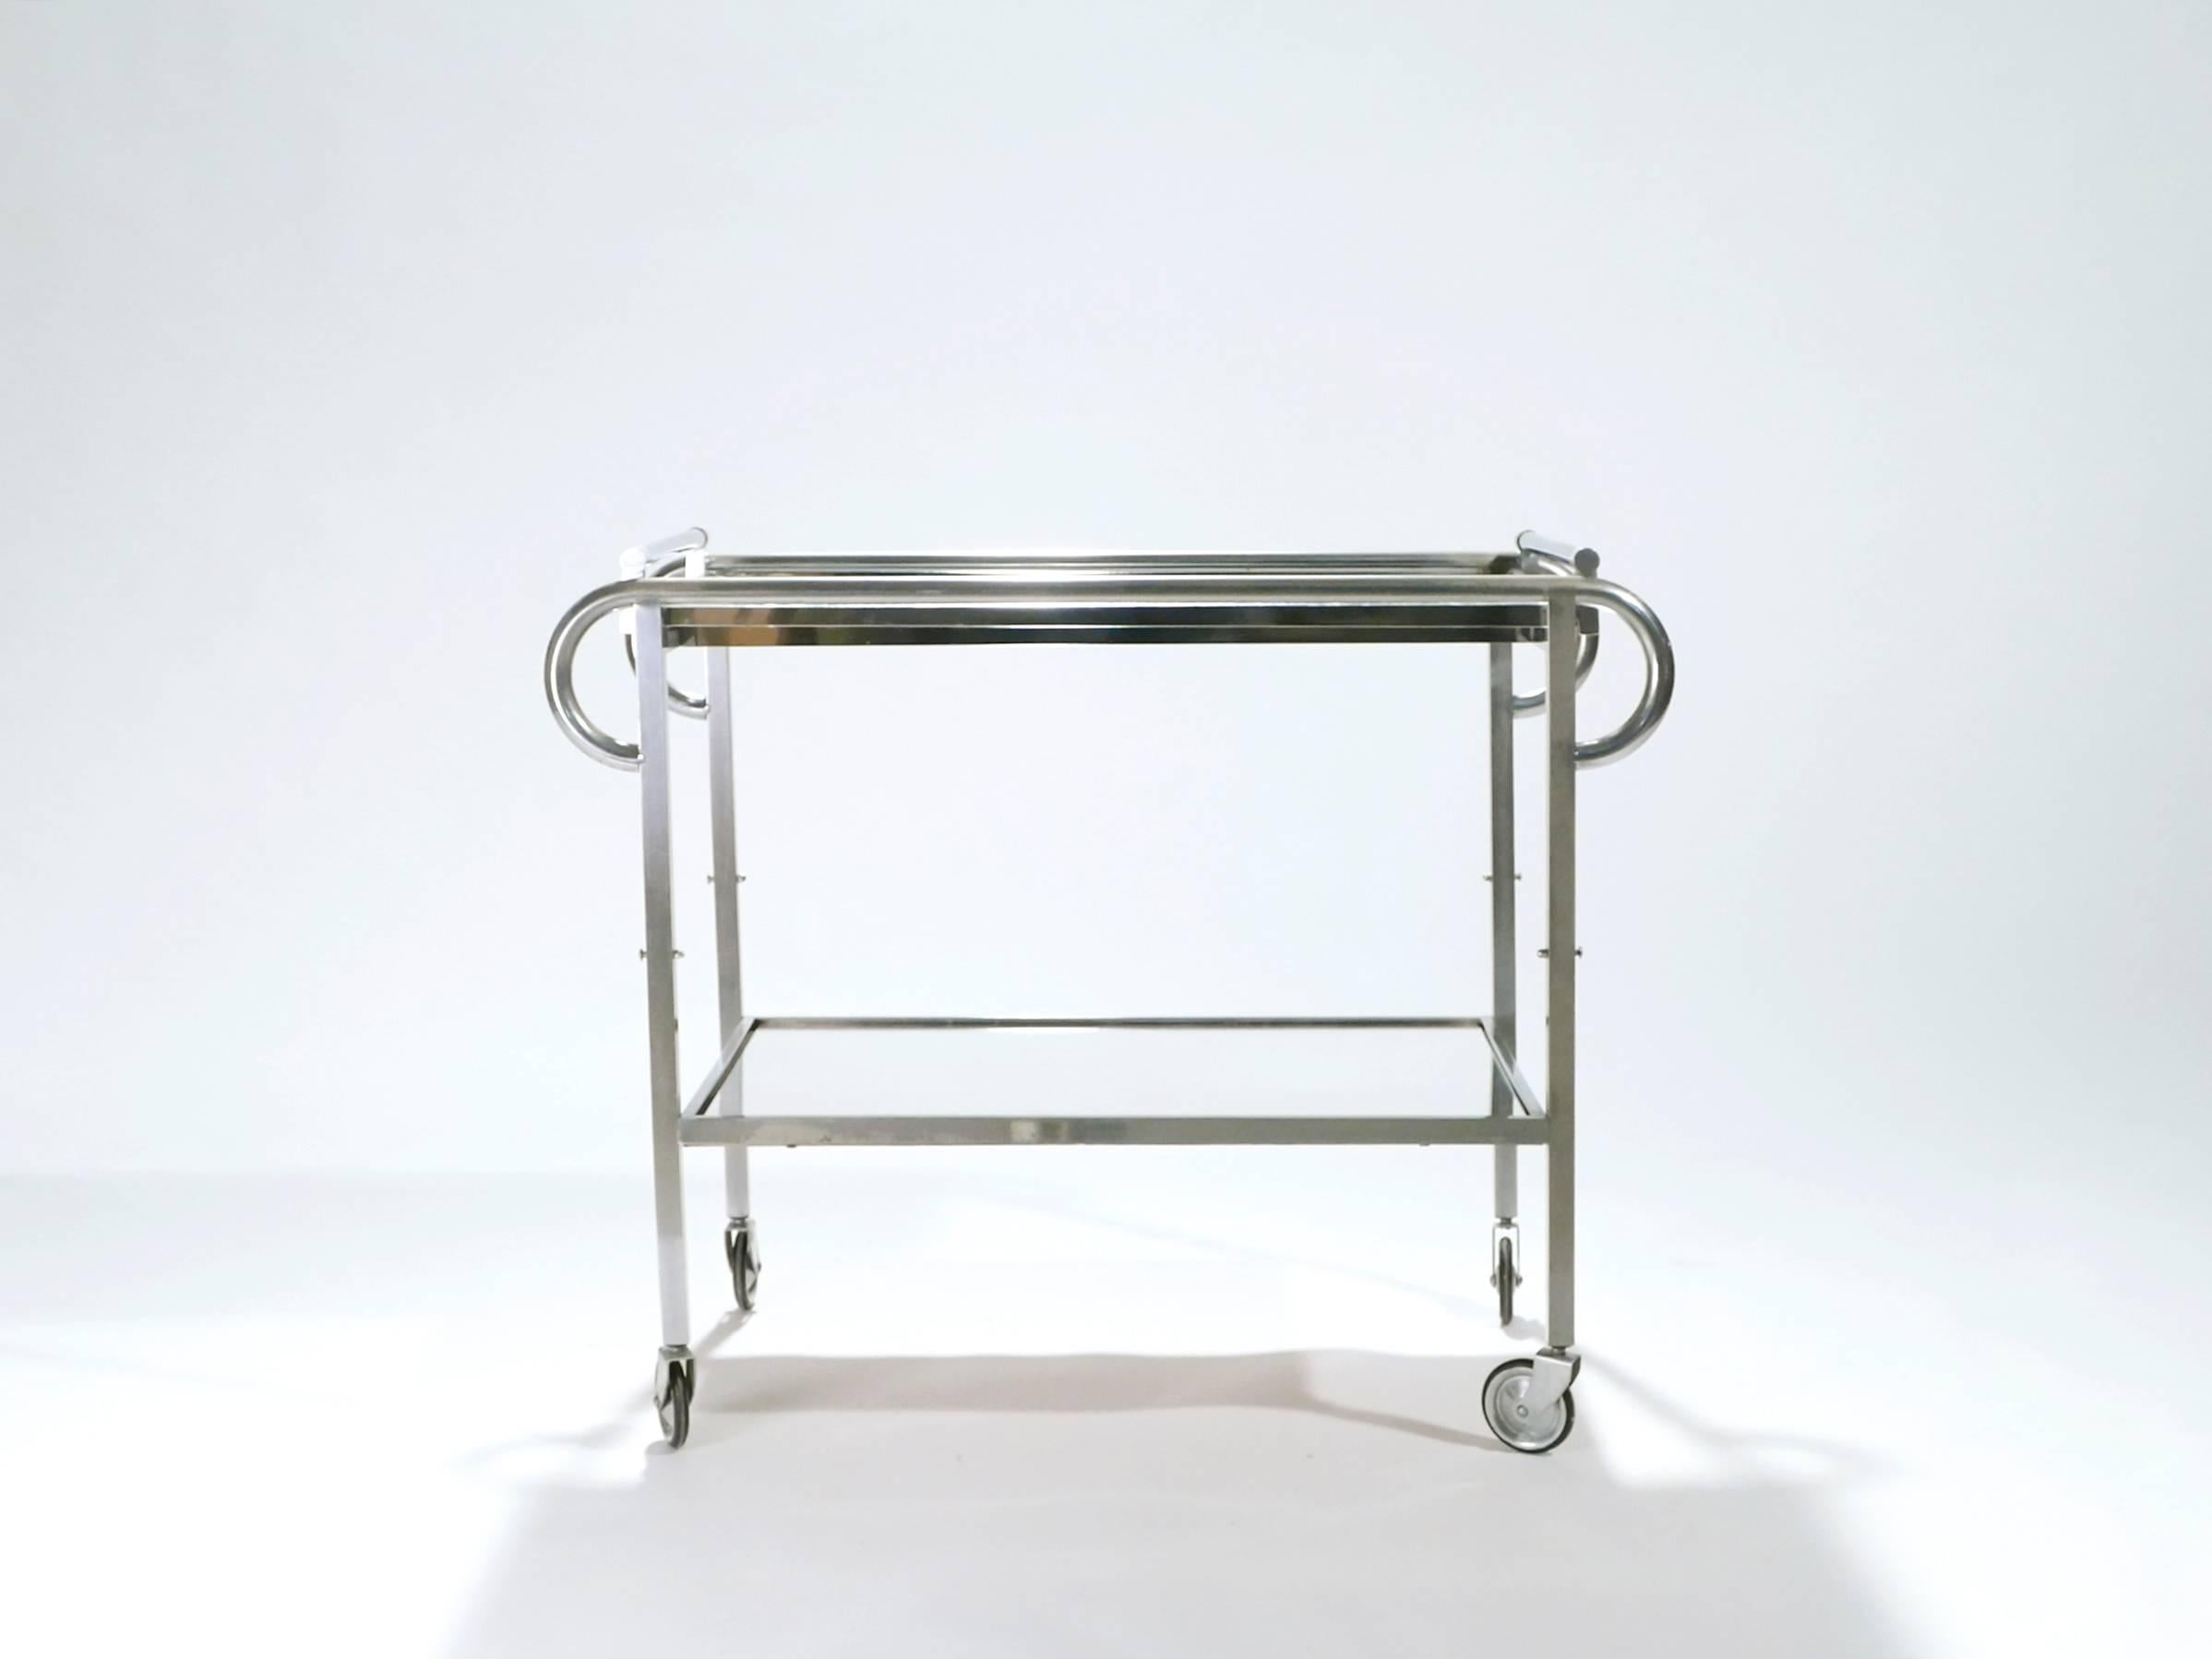 This chic bar cart from the 1930s carries with it the elegant mood of the late Art Deco period, especially with its bold, modern use of high-quality metals. It’s set on functioning wheels and has 2/3 mirrored surfaces on which to store your bottles